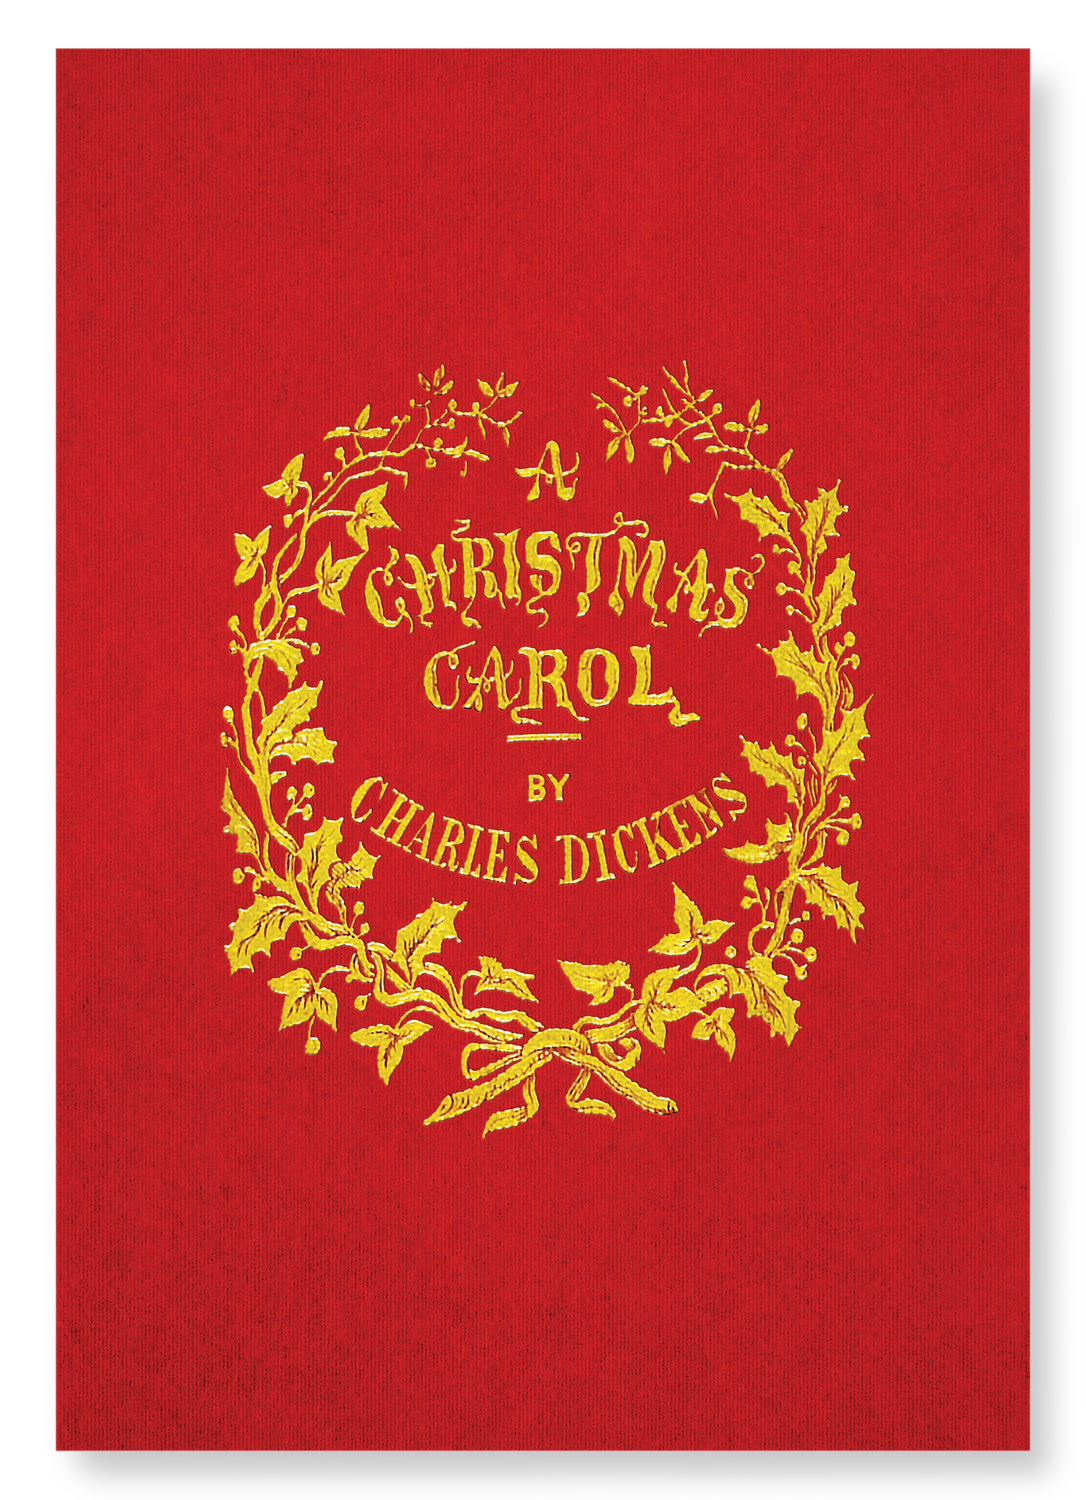 CHRISTMAS CAROL FRONT COVER (1843)